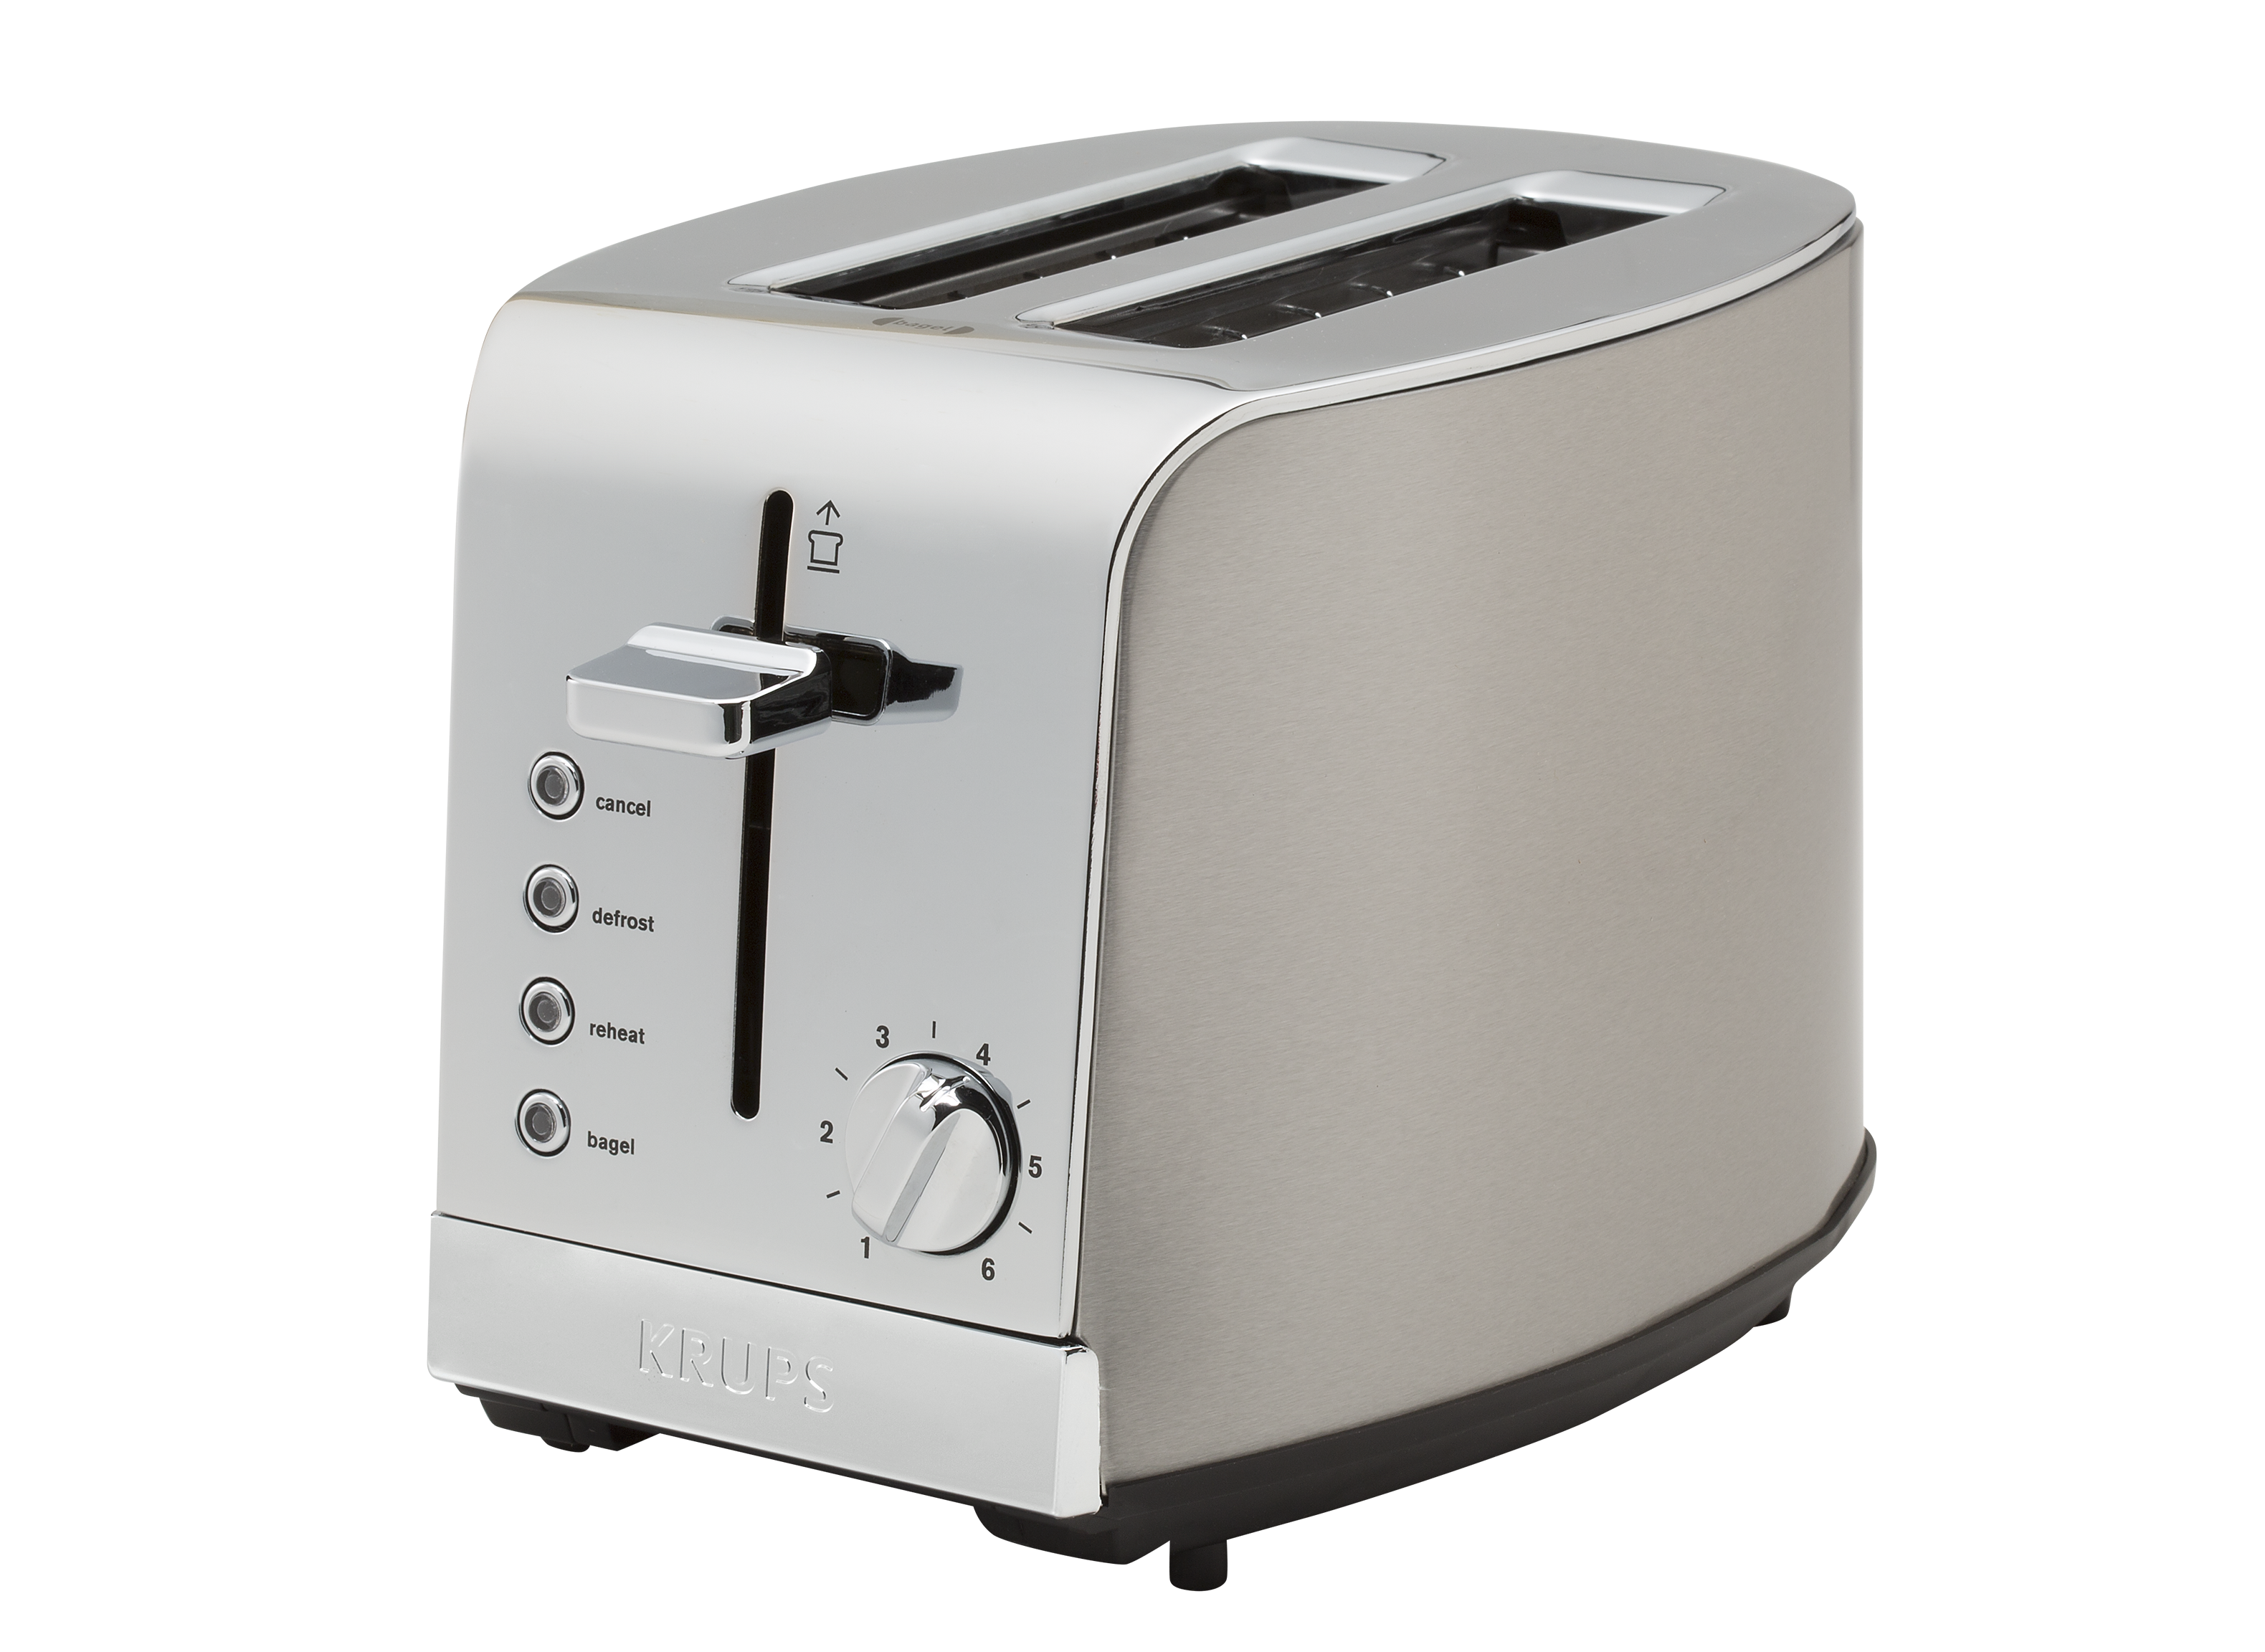 5 Functions with Cancel Silver KRUPS KH732D50 2-Slice Toaster Defrost Stainless Steel Toaster Reheat and Bagel Cord Storage Toasting 